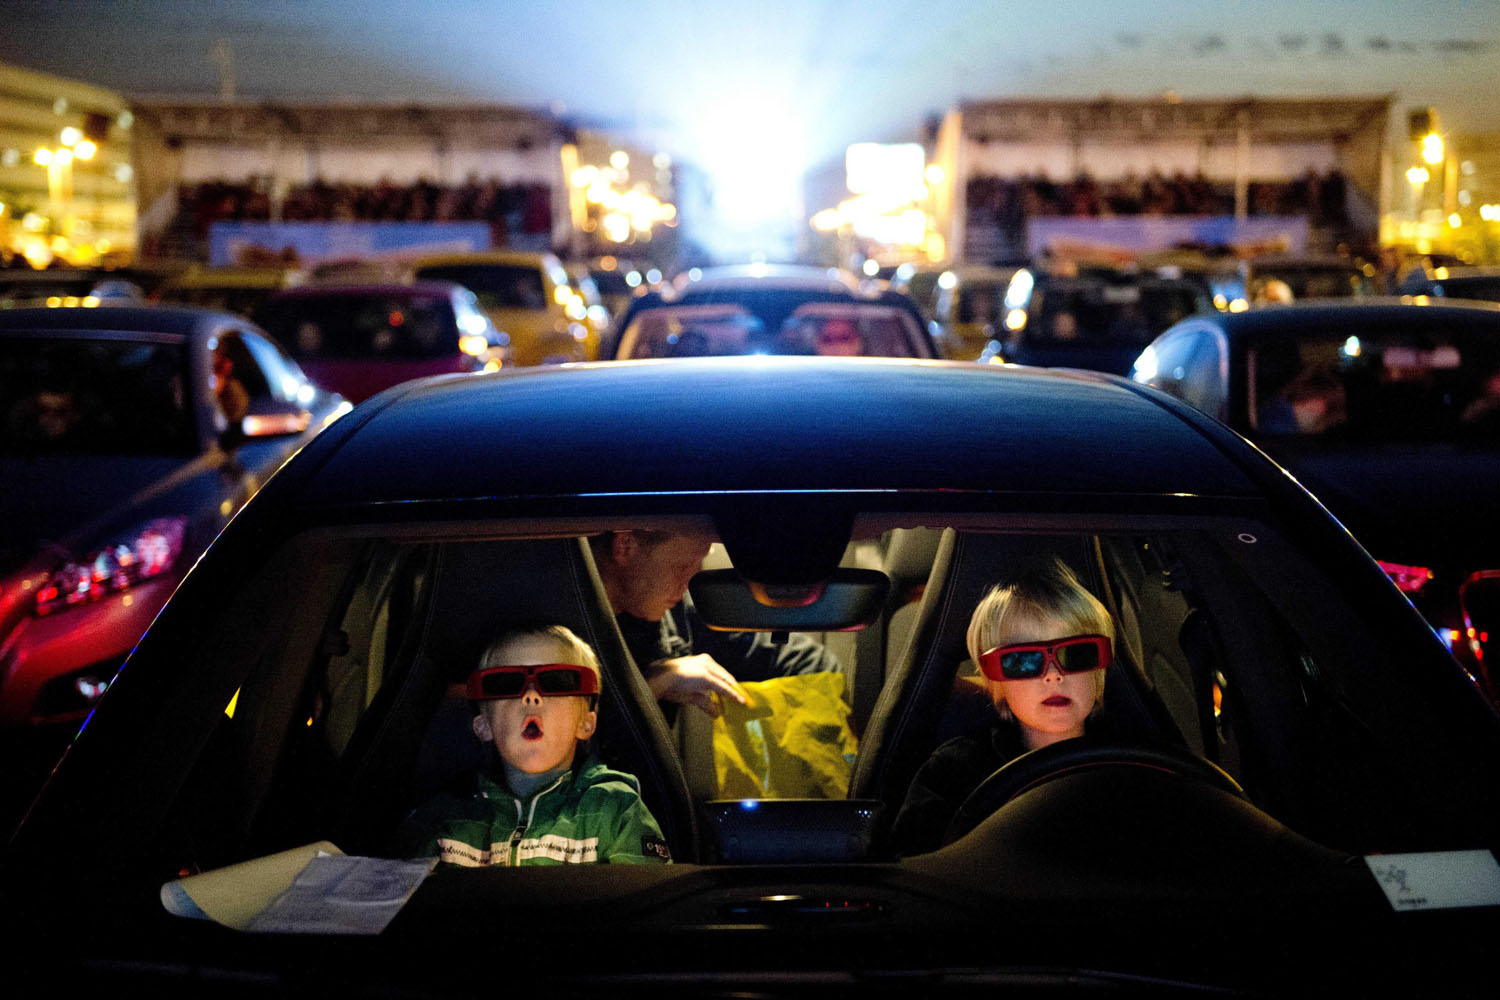 Sept. 27, 2013. Young visitors wearing 3D glasses sit in their car and watch the Disney movie 'Planes' at the drive-in movie theater on the parking lot of Amsterdam Airport Schiphol, The Netherlands.